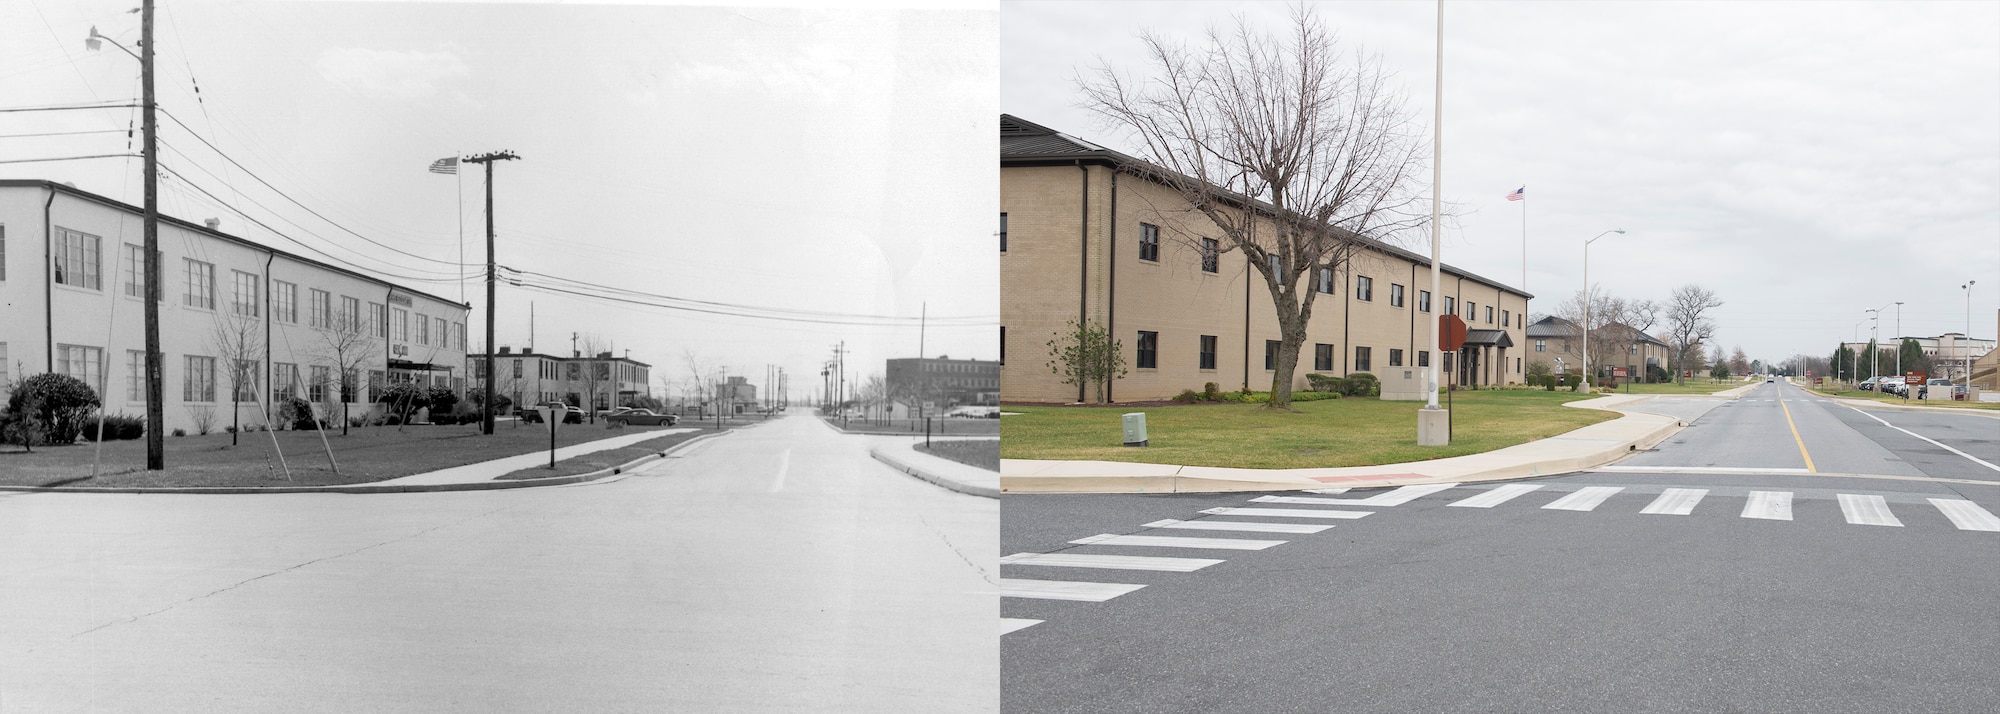 Circa 1970s versus 2016: A view down Eagle Way with the 436th Airlift Wing headquarters building on the left. (U.S. Air Force photo illustration by Senior Airman Zachary Cacicia)